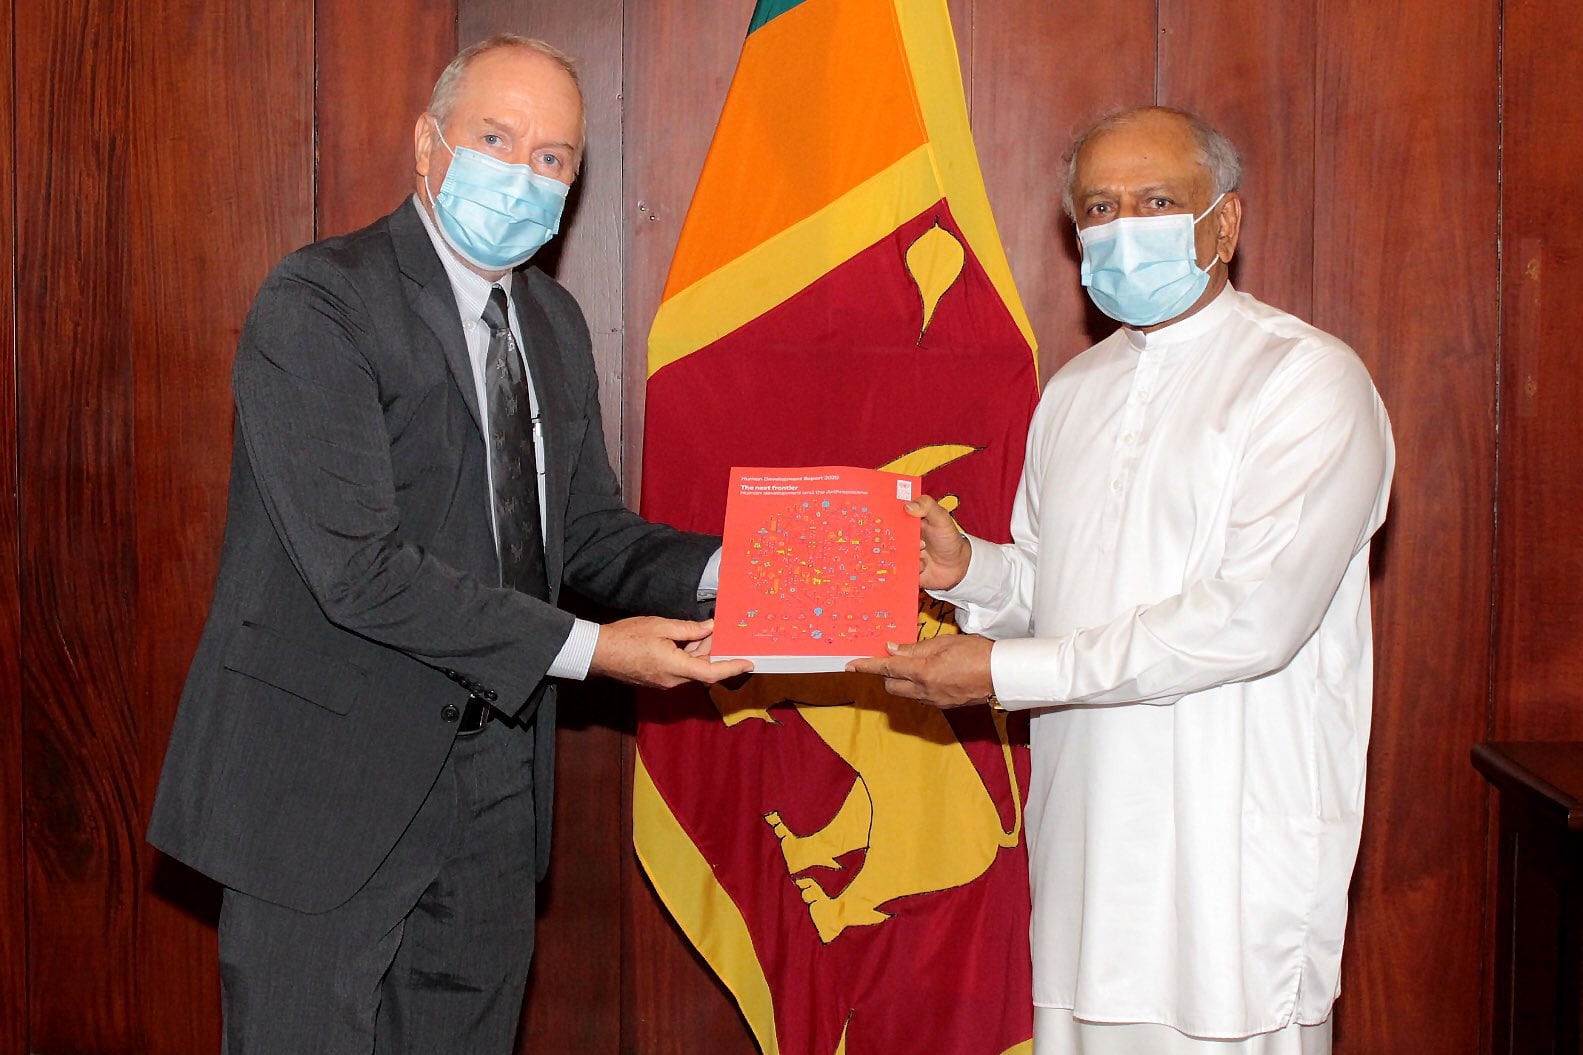 UNDP Human Development Report presented to the Foreign Minister